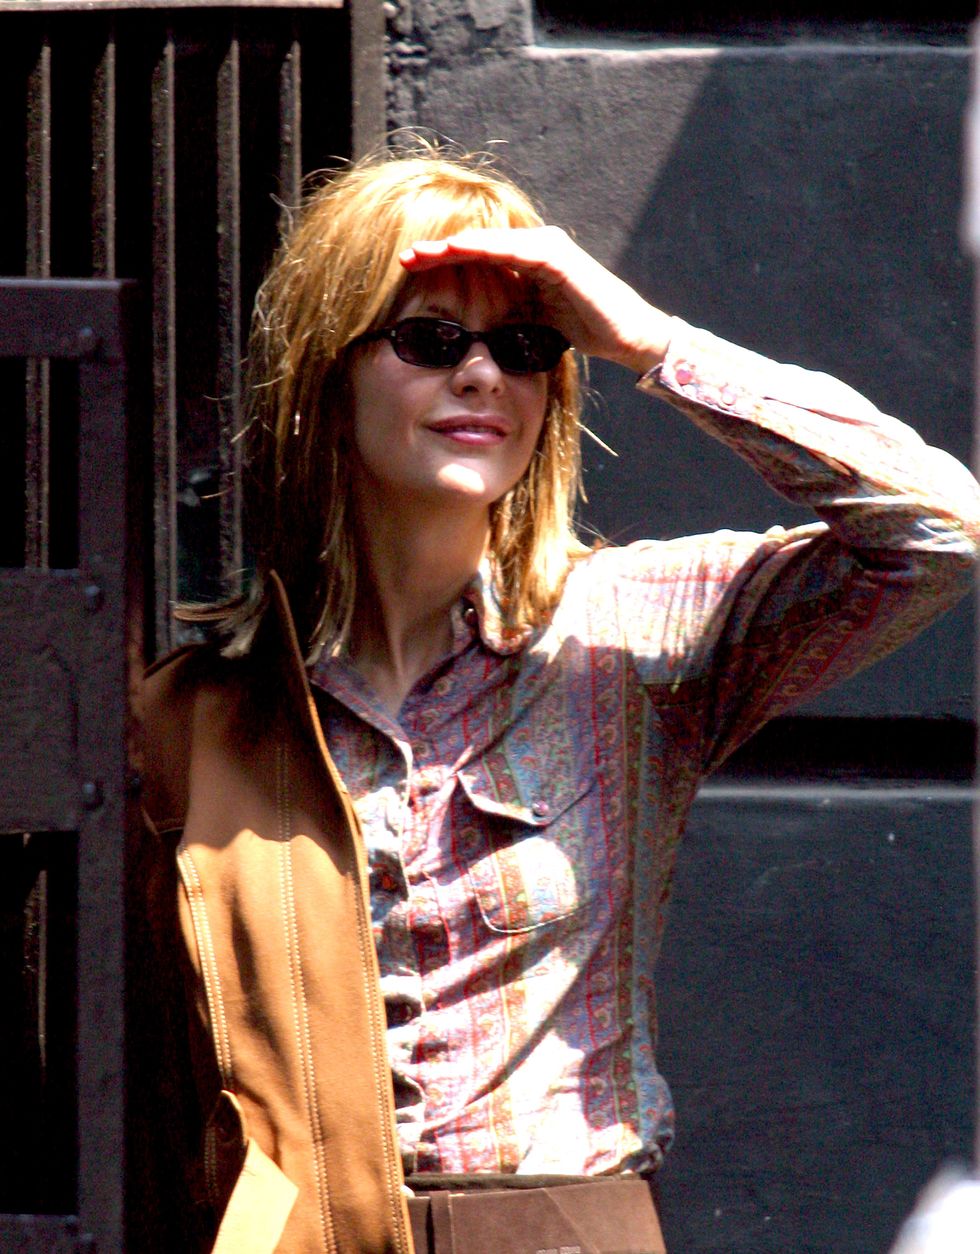 meg ryan, jennifer jason leigh kevin bacon on location for new movie in the cut